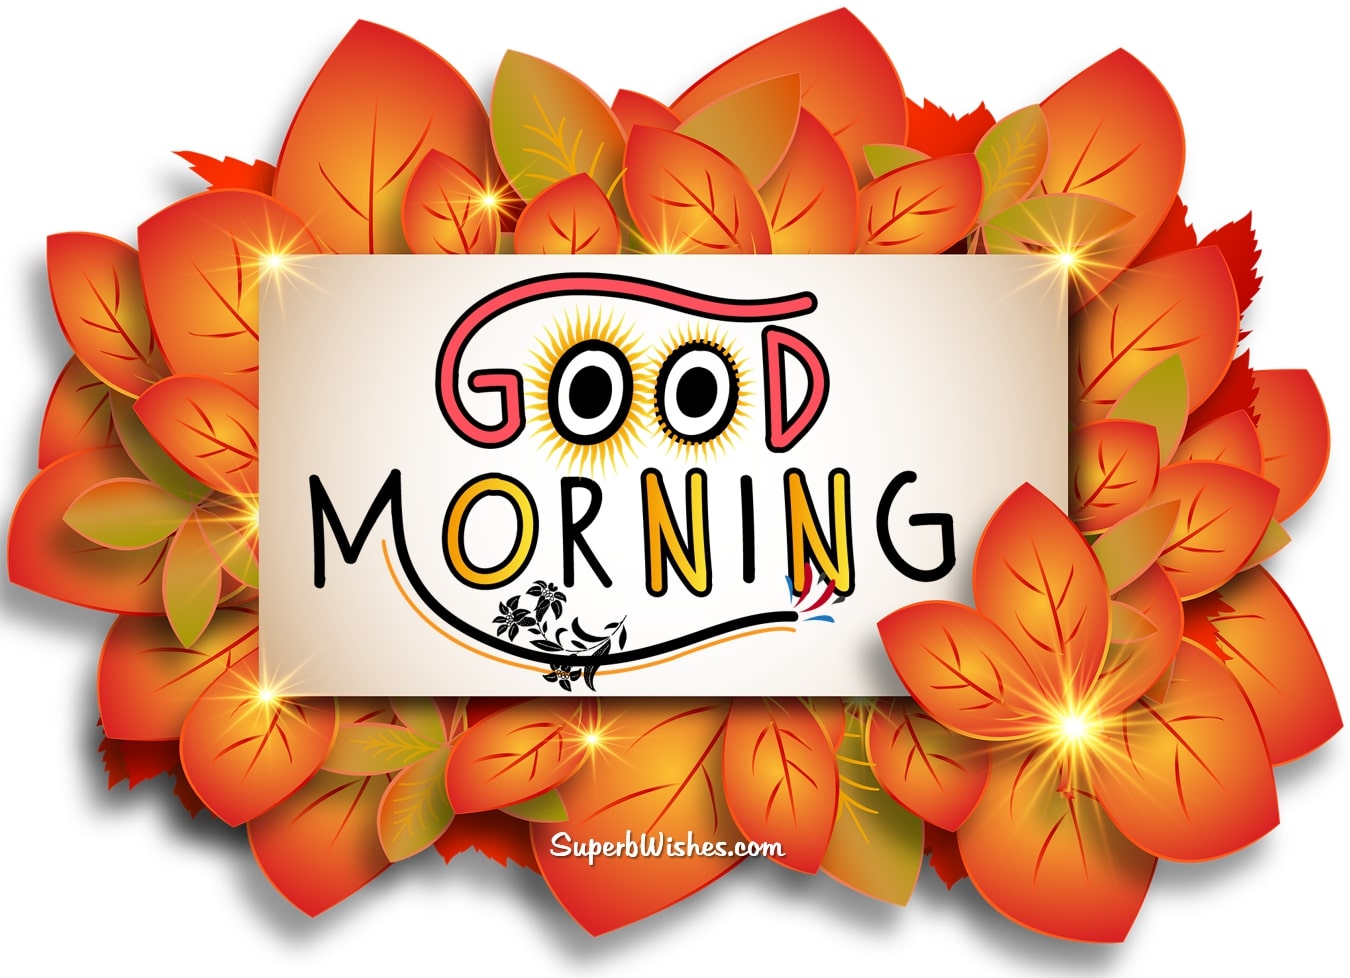 Amazing Good Morning Image For Your Loved Ones | SuperbWishes.com